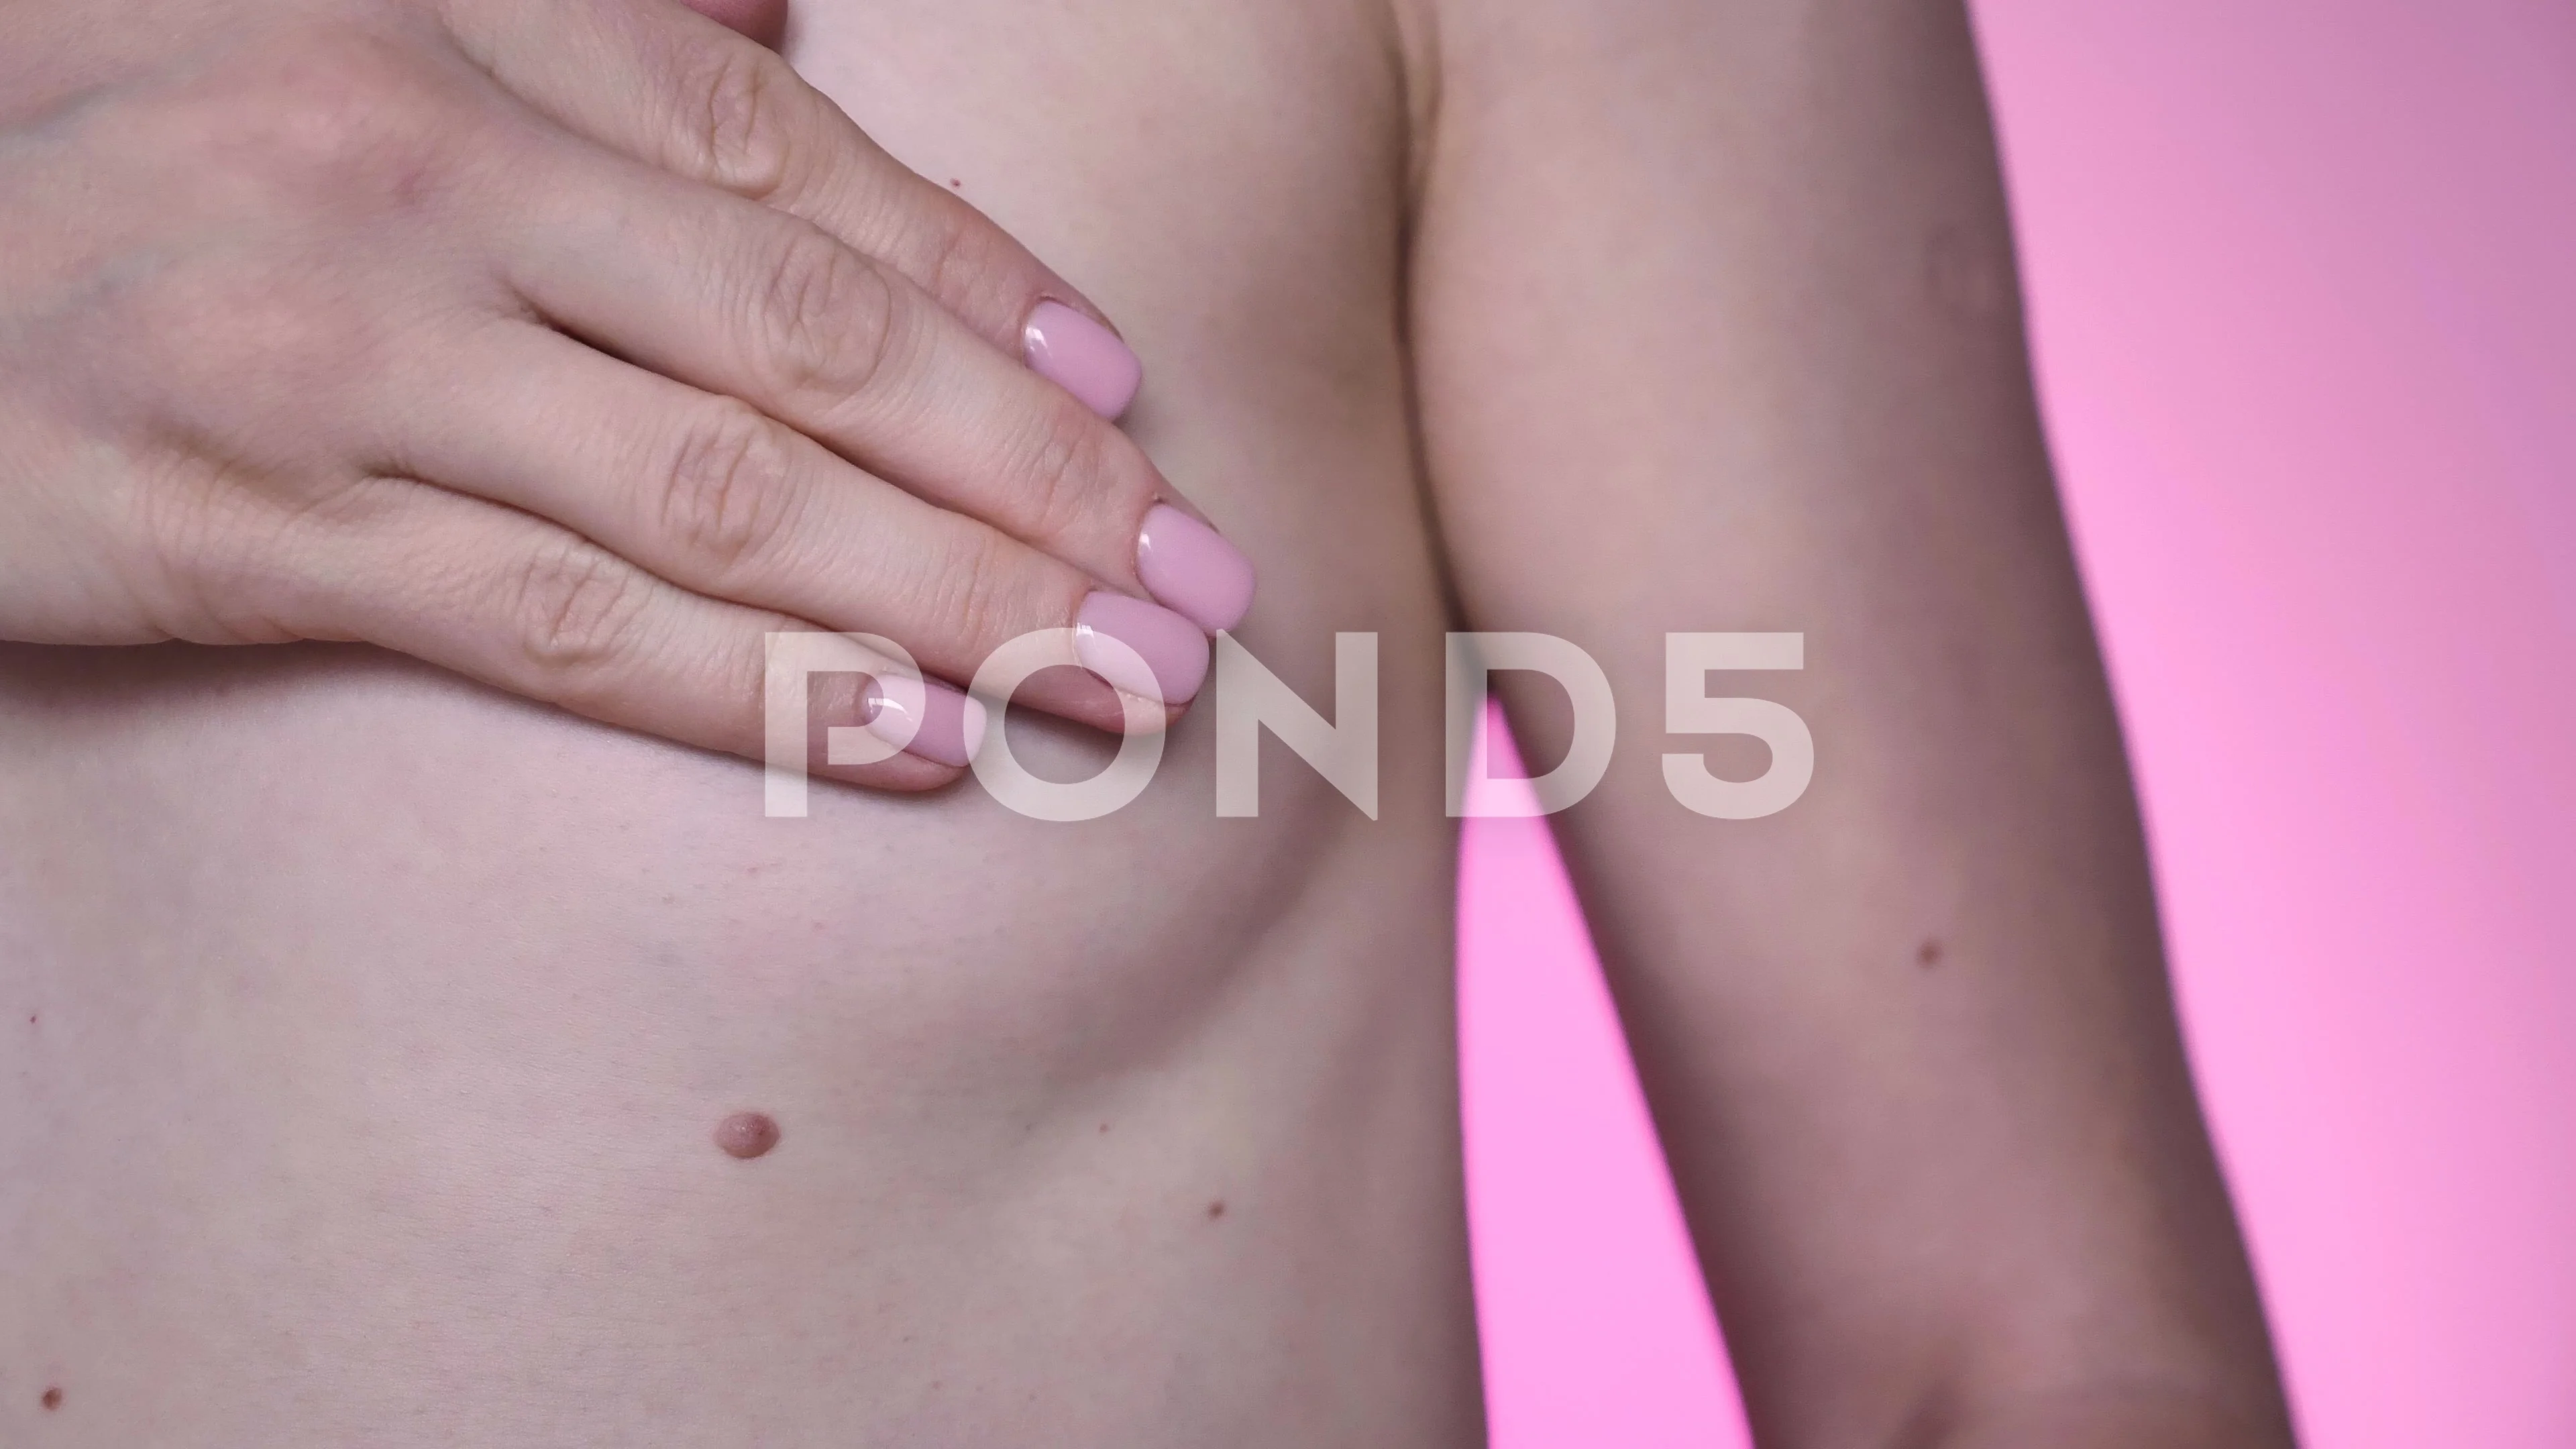 https://images.pond5.com/small-breasts-aa-diagnosis-breast-footage-253223760_prevstill.jpeg